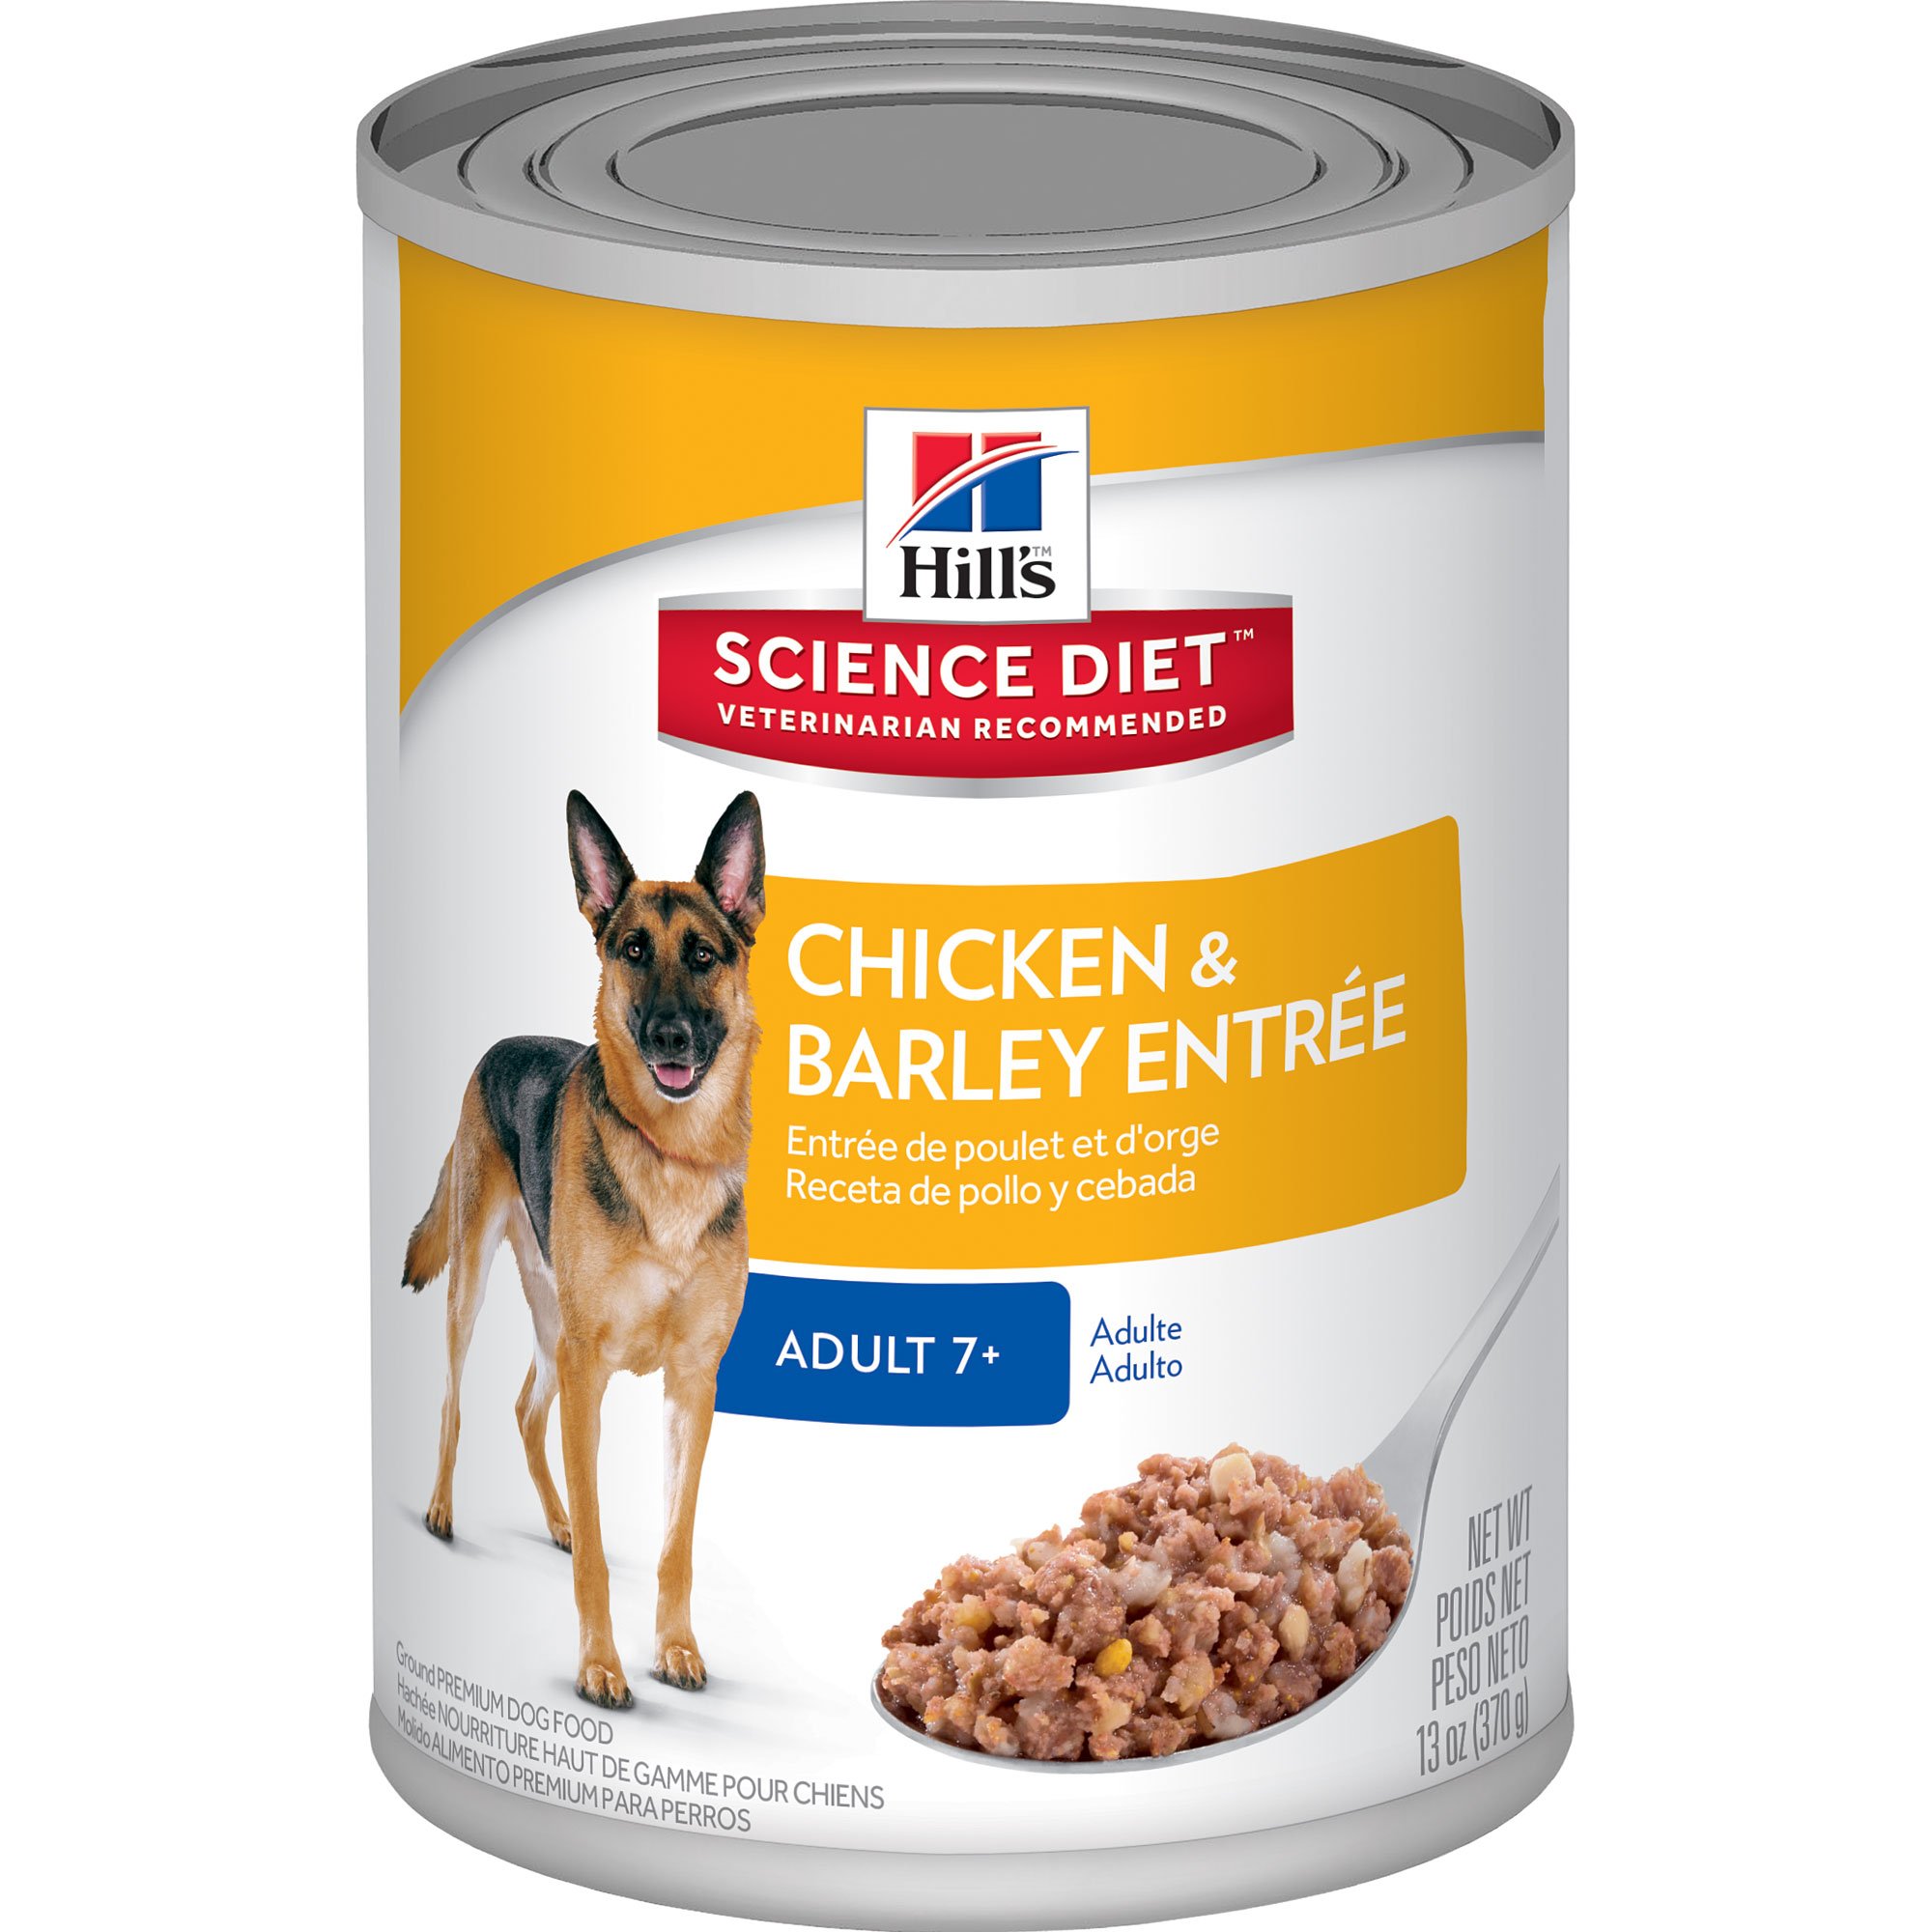 The Truth Behind Commercial Dog Food 2